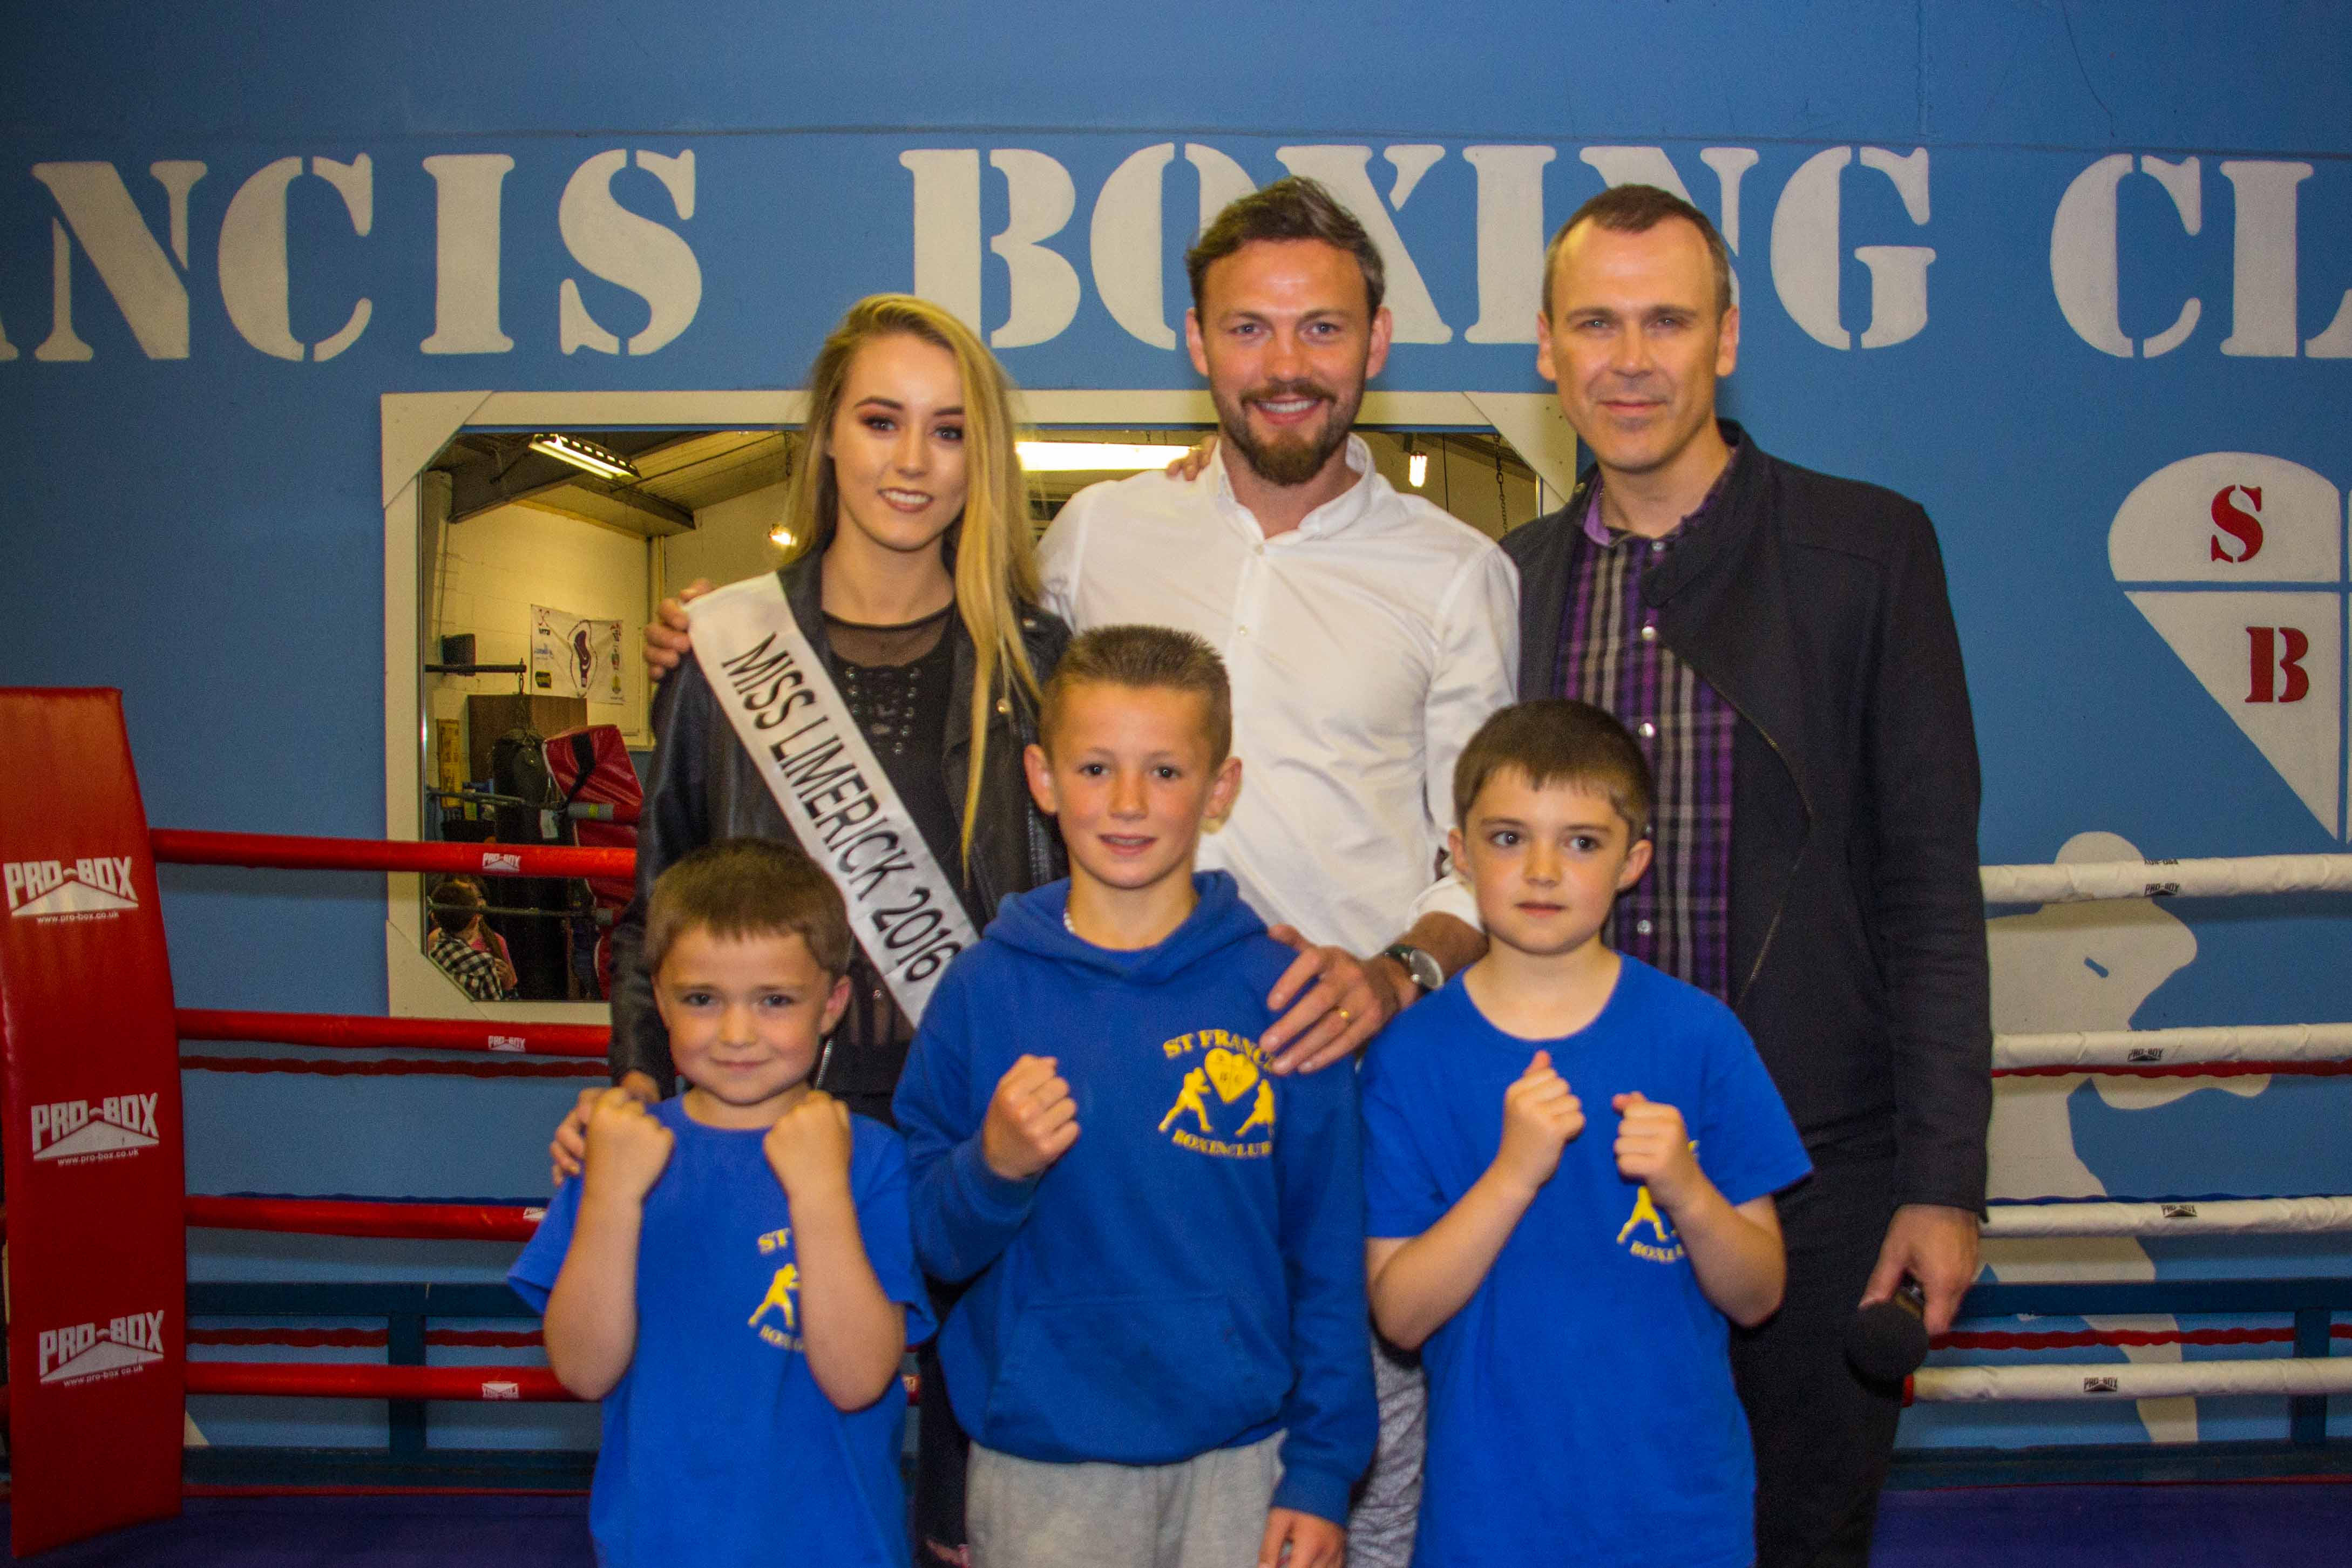 Pictured at St. Francis Boxng Club, (Back) Miss Limerick 2016 Aoife McNamara, Former WBO World Middleweight Champion Andy Lee and Richard Lynch. (Front) Oisin Moore, Davy O'Neill All Ireland Champion under 29kg and Eoin Moore. picture by Cian Reinhardt/ilovelimerick